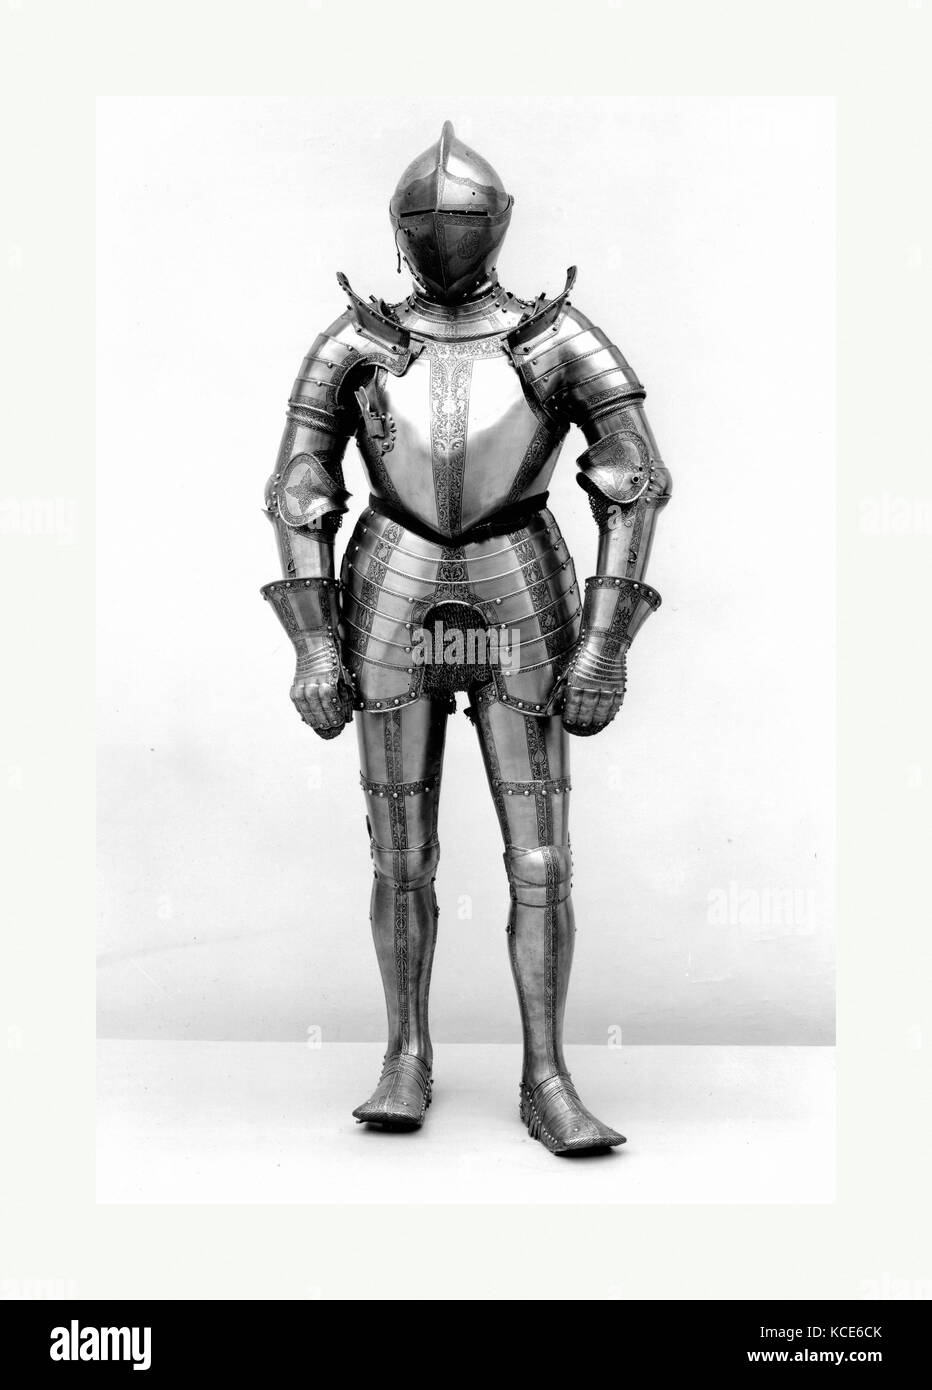 Armor, dated 1548, with later restorations, Nuremberg, German, Nuremberg, Steel, leather, copper alloy, textile, Wt. approx. 56 Stock Photo